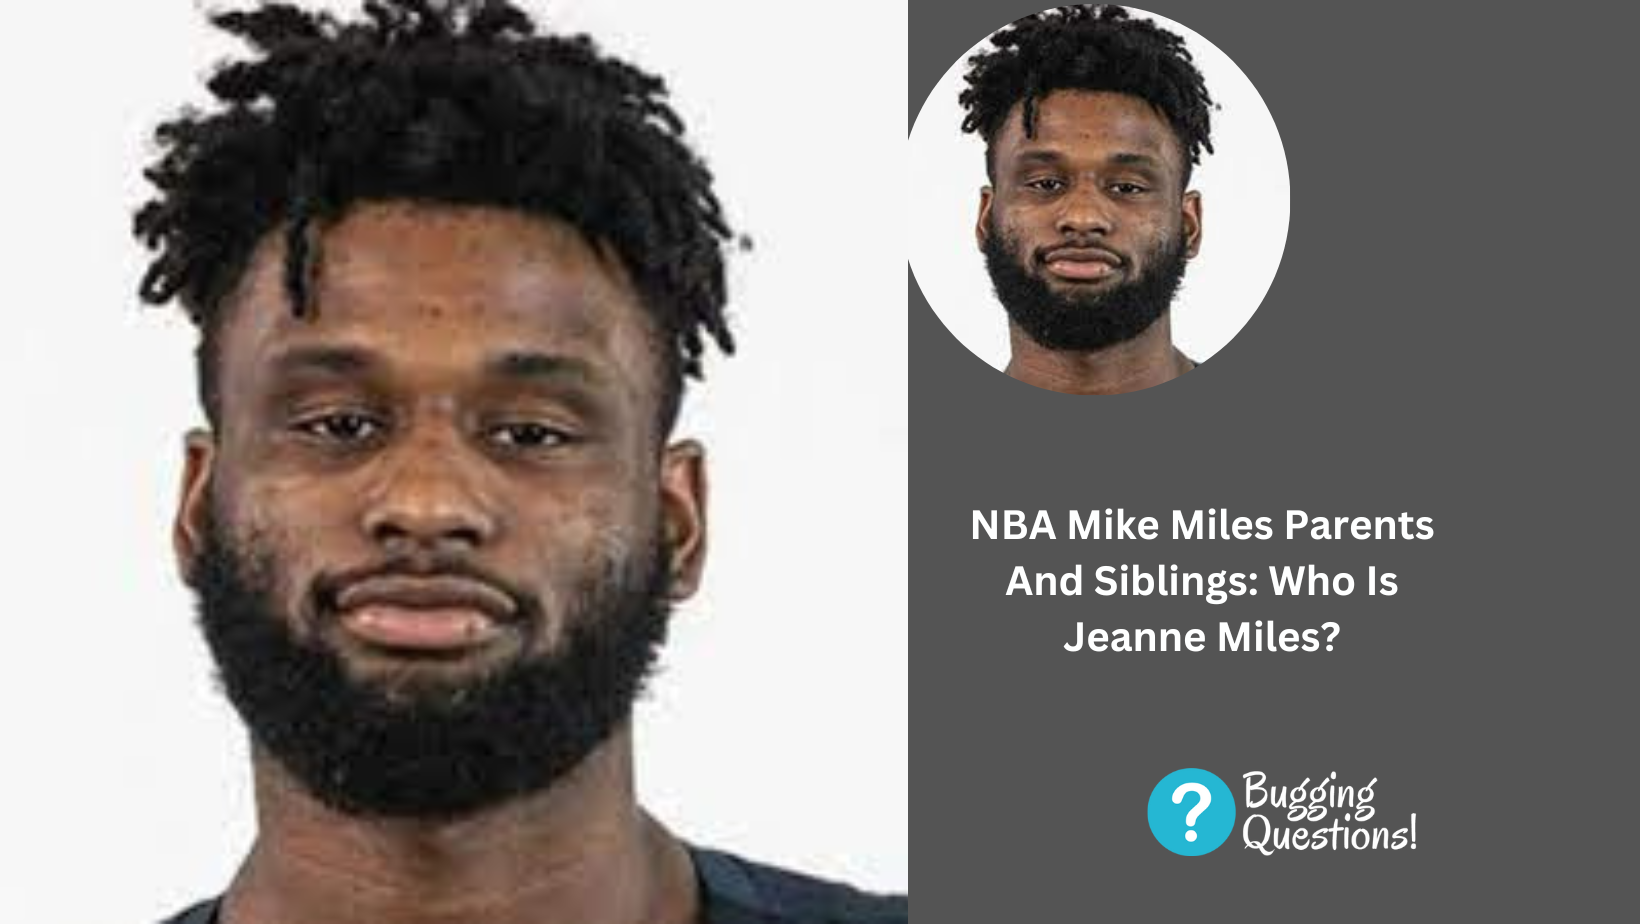 NBA Mike Miles Parents And Siblings: Who Is Jeanne Miles?